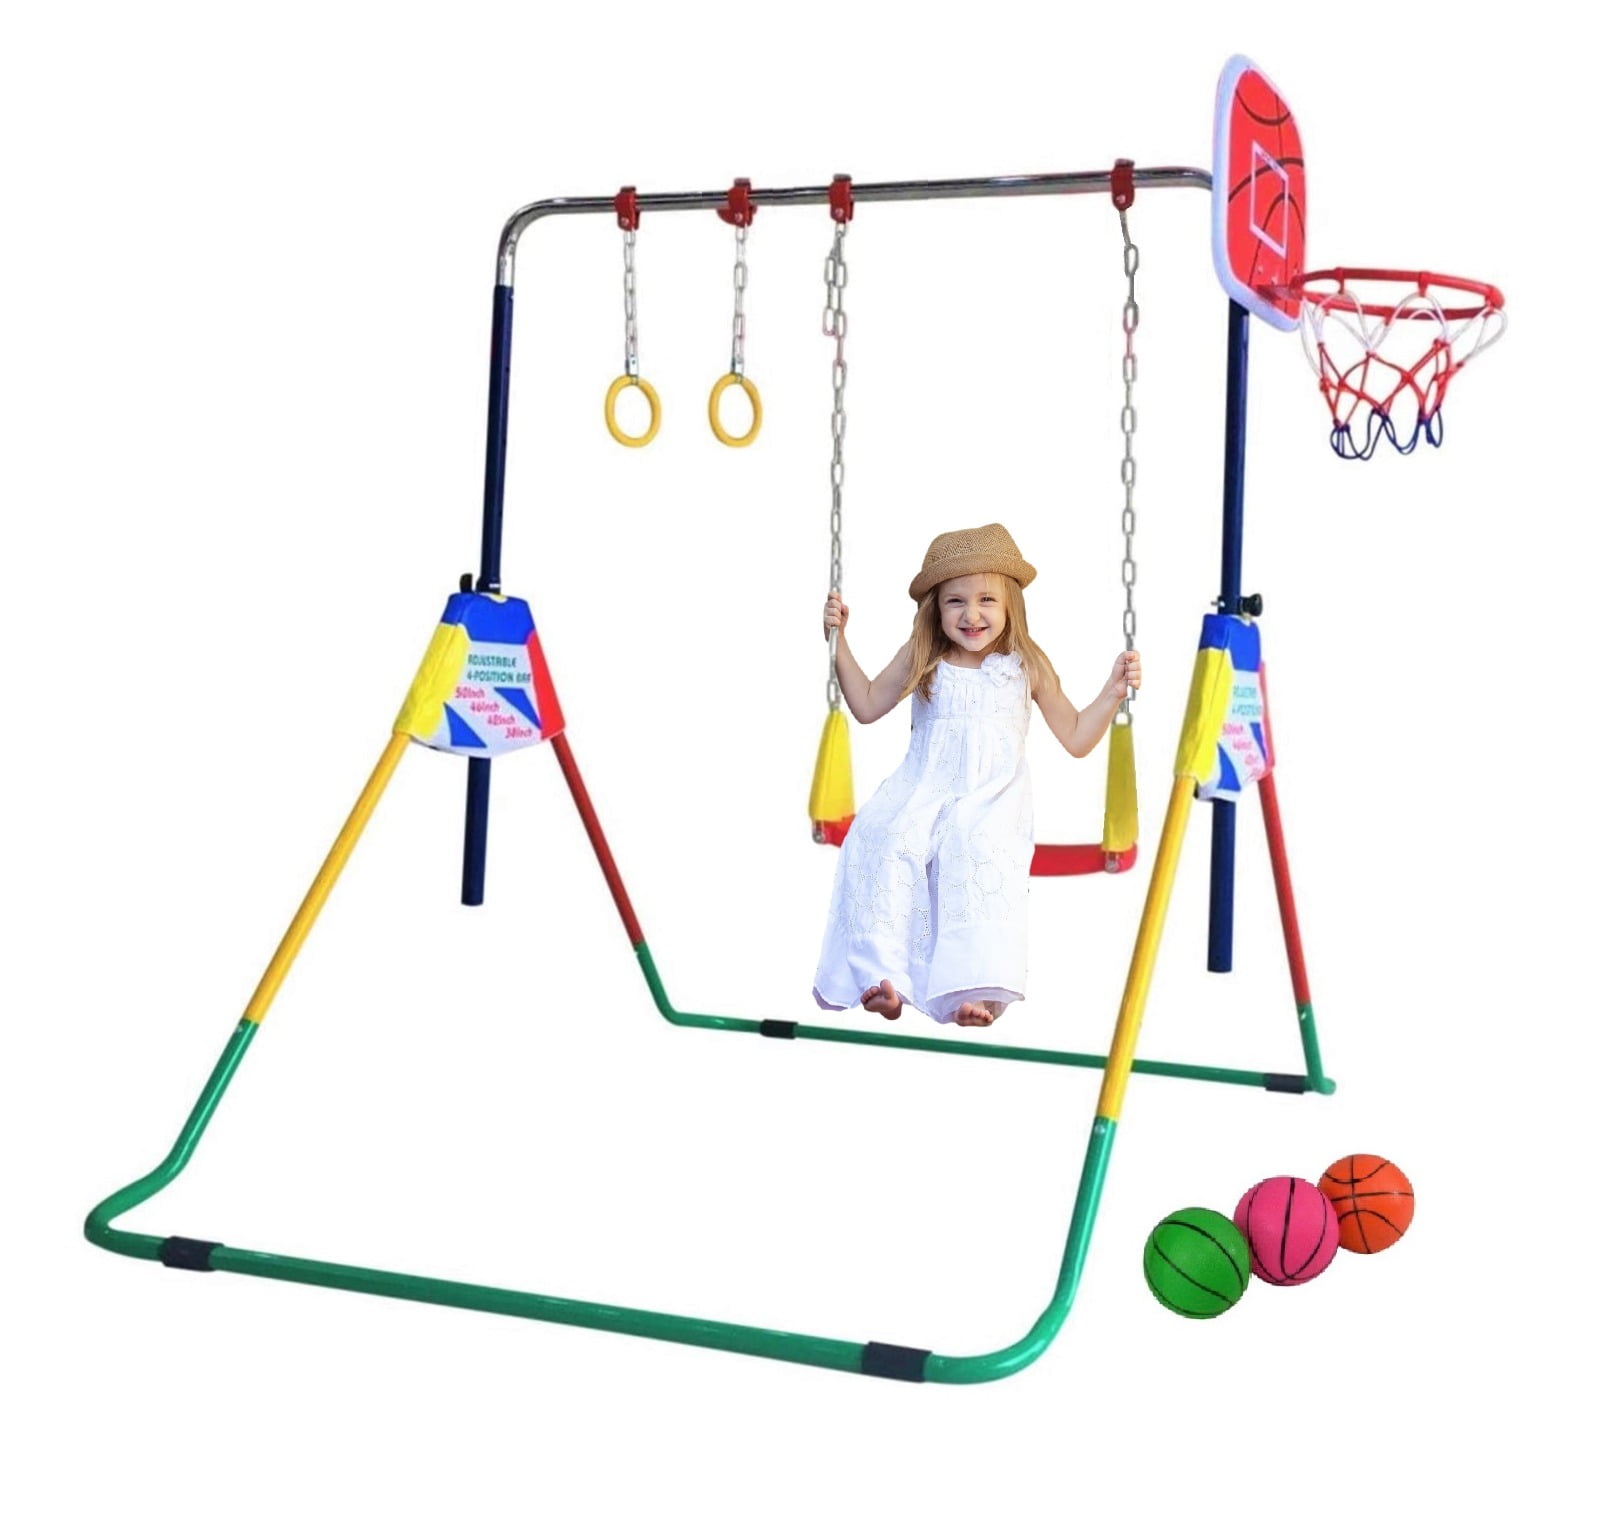 Trapeze Rings Playground Playset Horziontal Gymnastics Monkey Bars Expandable Junior Training Bar Foldable w Stretch Band ToyKraft 3 in 1 Kids Jungle Gym Gymnastics Kip Bar Junior Training Deluxe Swing 